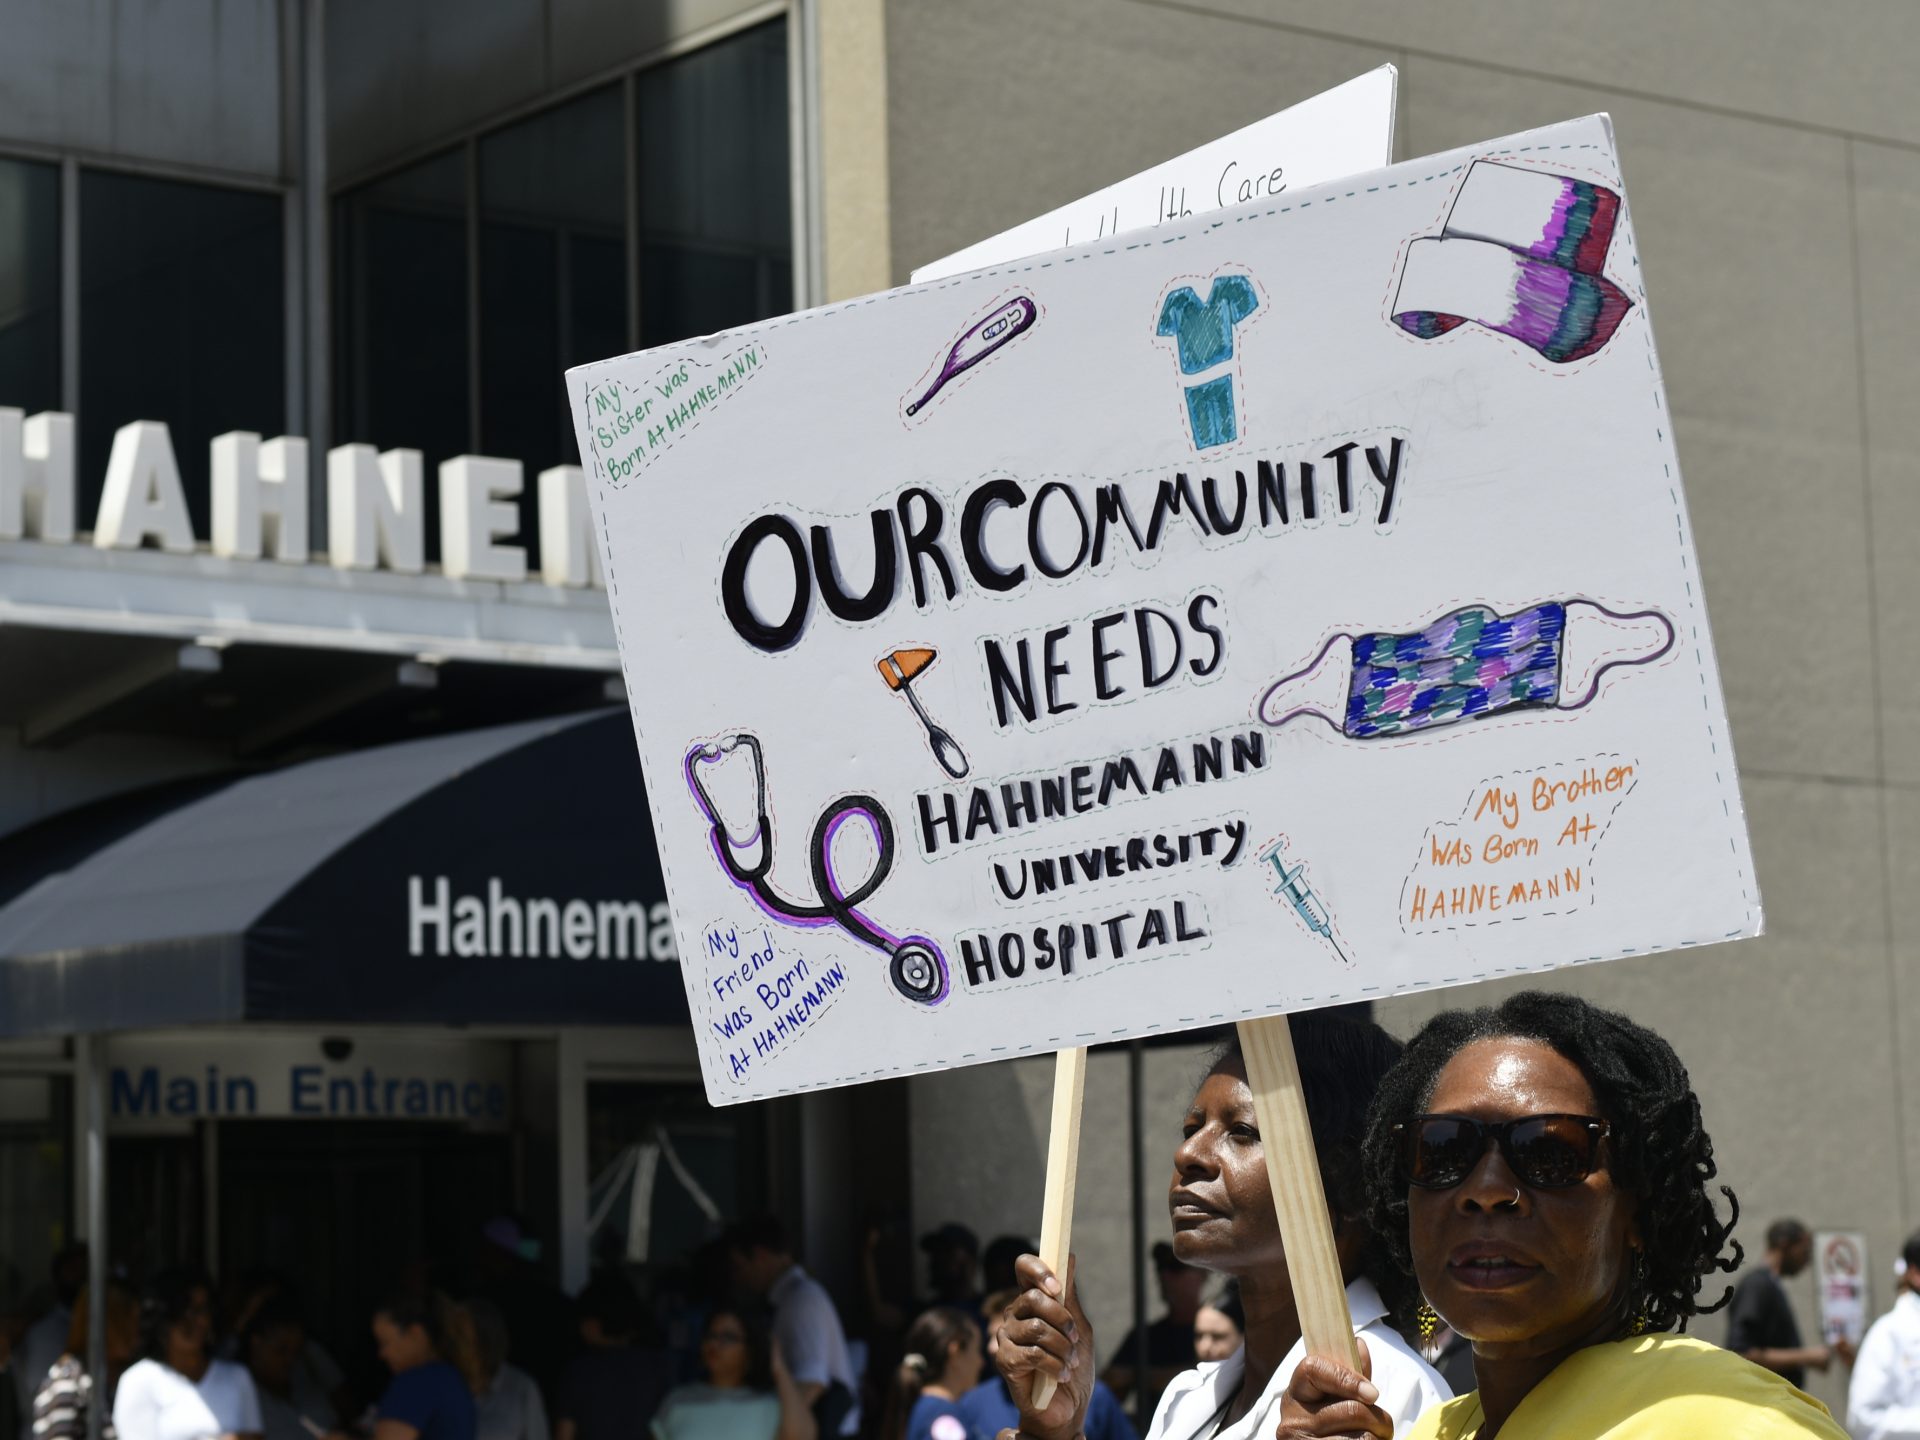 Philadelphia residents, hospital workers, and local politicians protested the imminent closure of Hahnemann University Hospital at a rally on July 15, 2019. In March 2020, city leaders tried but failed to strike a deal with the hospital's new owner to reopen the facility for an expected coronavirus surge.